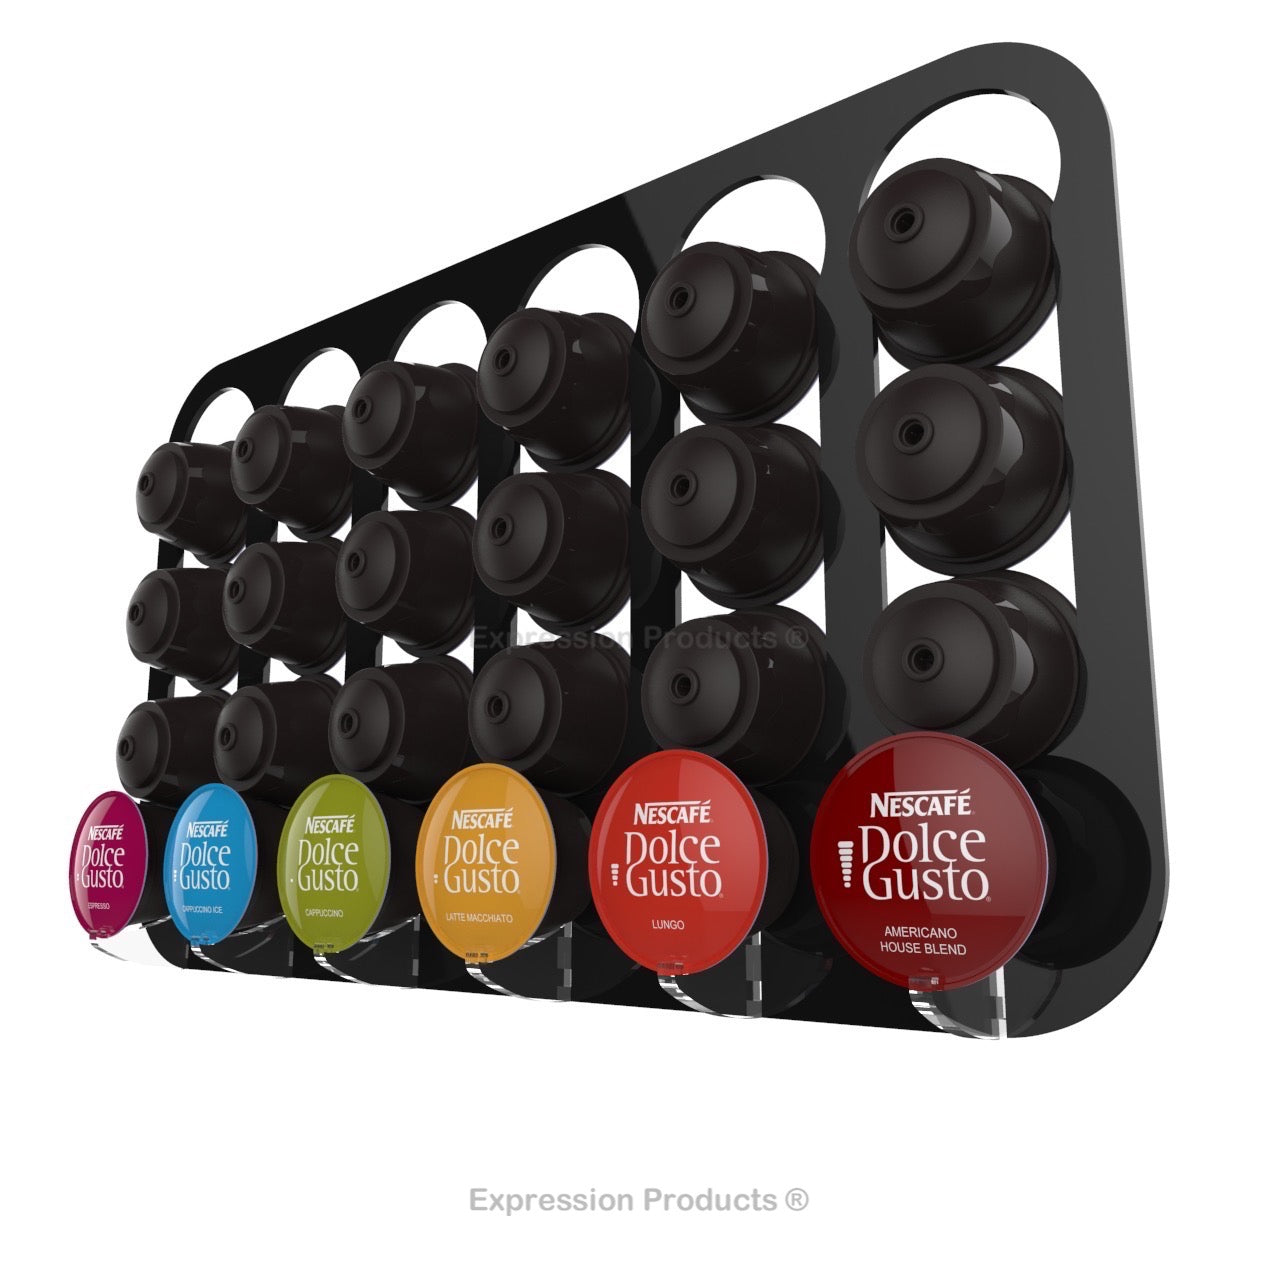 Dolce gusto coffee pod holder, wall mounted, half height.  Shown in black holding 24 pods